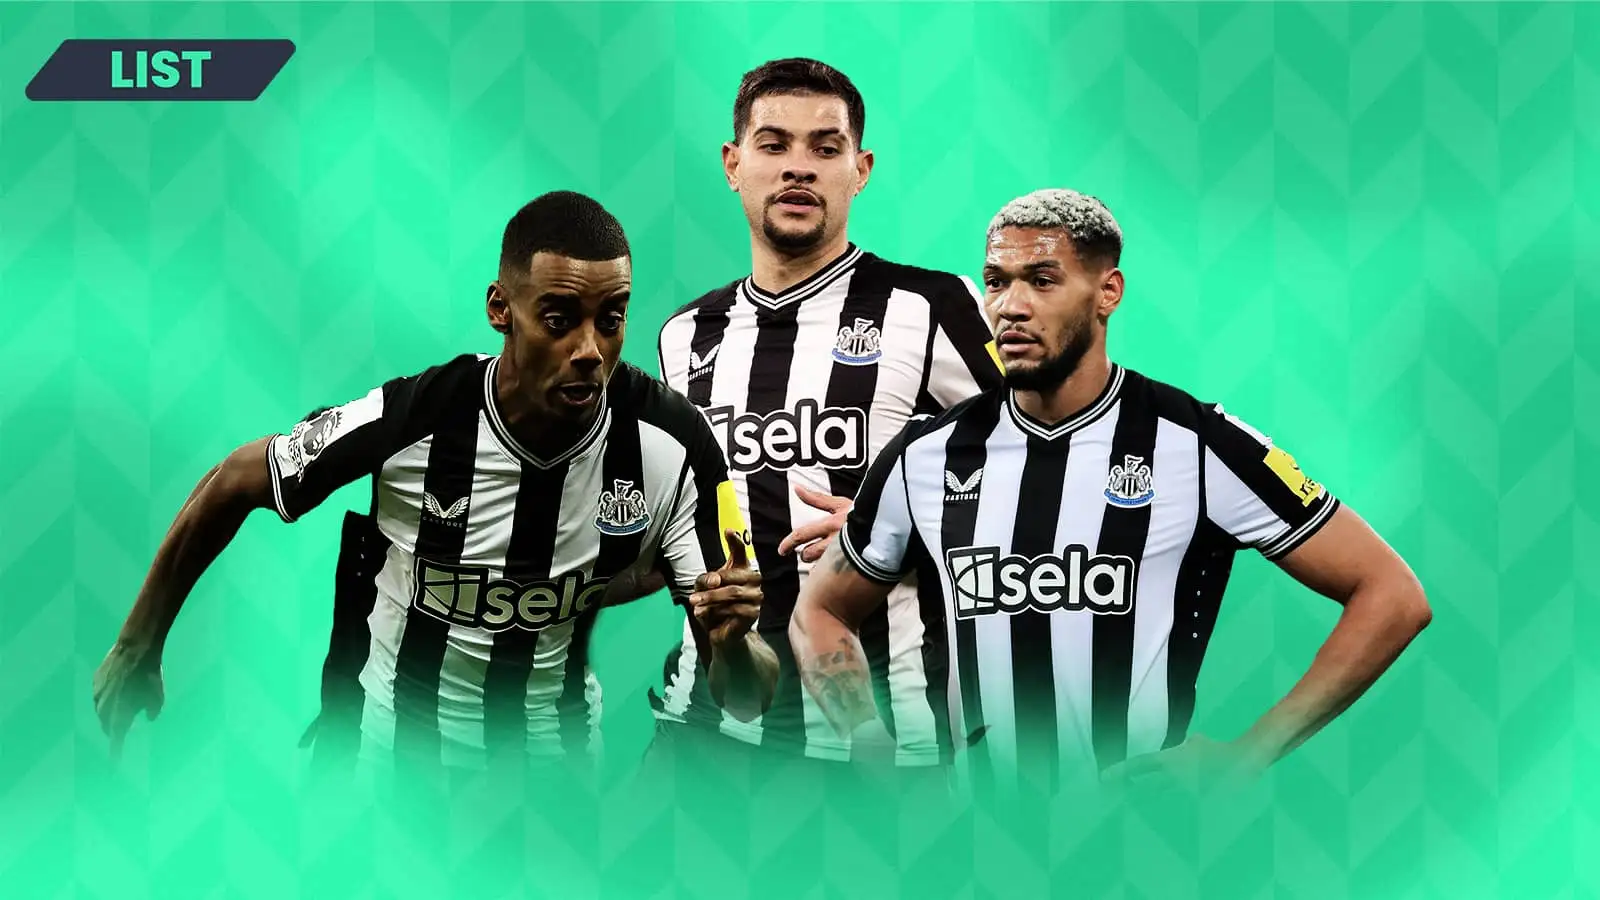 Top 10 most transferable Newcastle stars if FFP concerns force Magpies into major summer sales